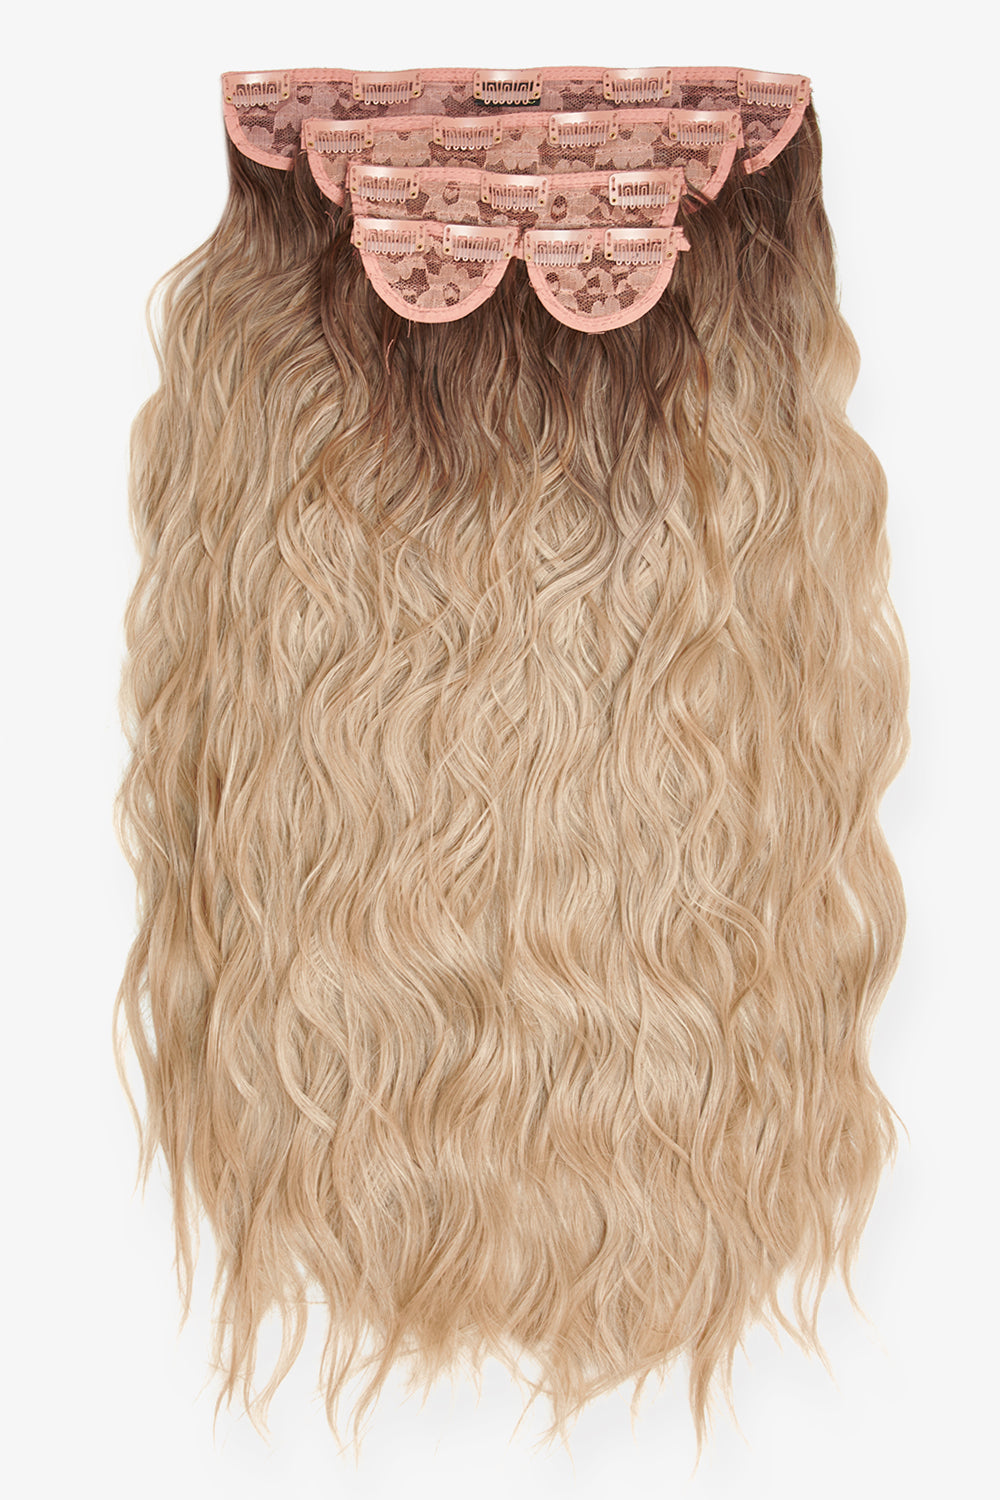 Super Thick 26" 5 Piece Waist Length Wave Clip In Hair Extensions - LullaBellz  - Rooted California Blonde